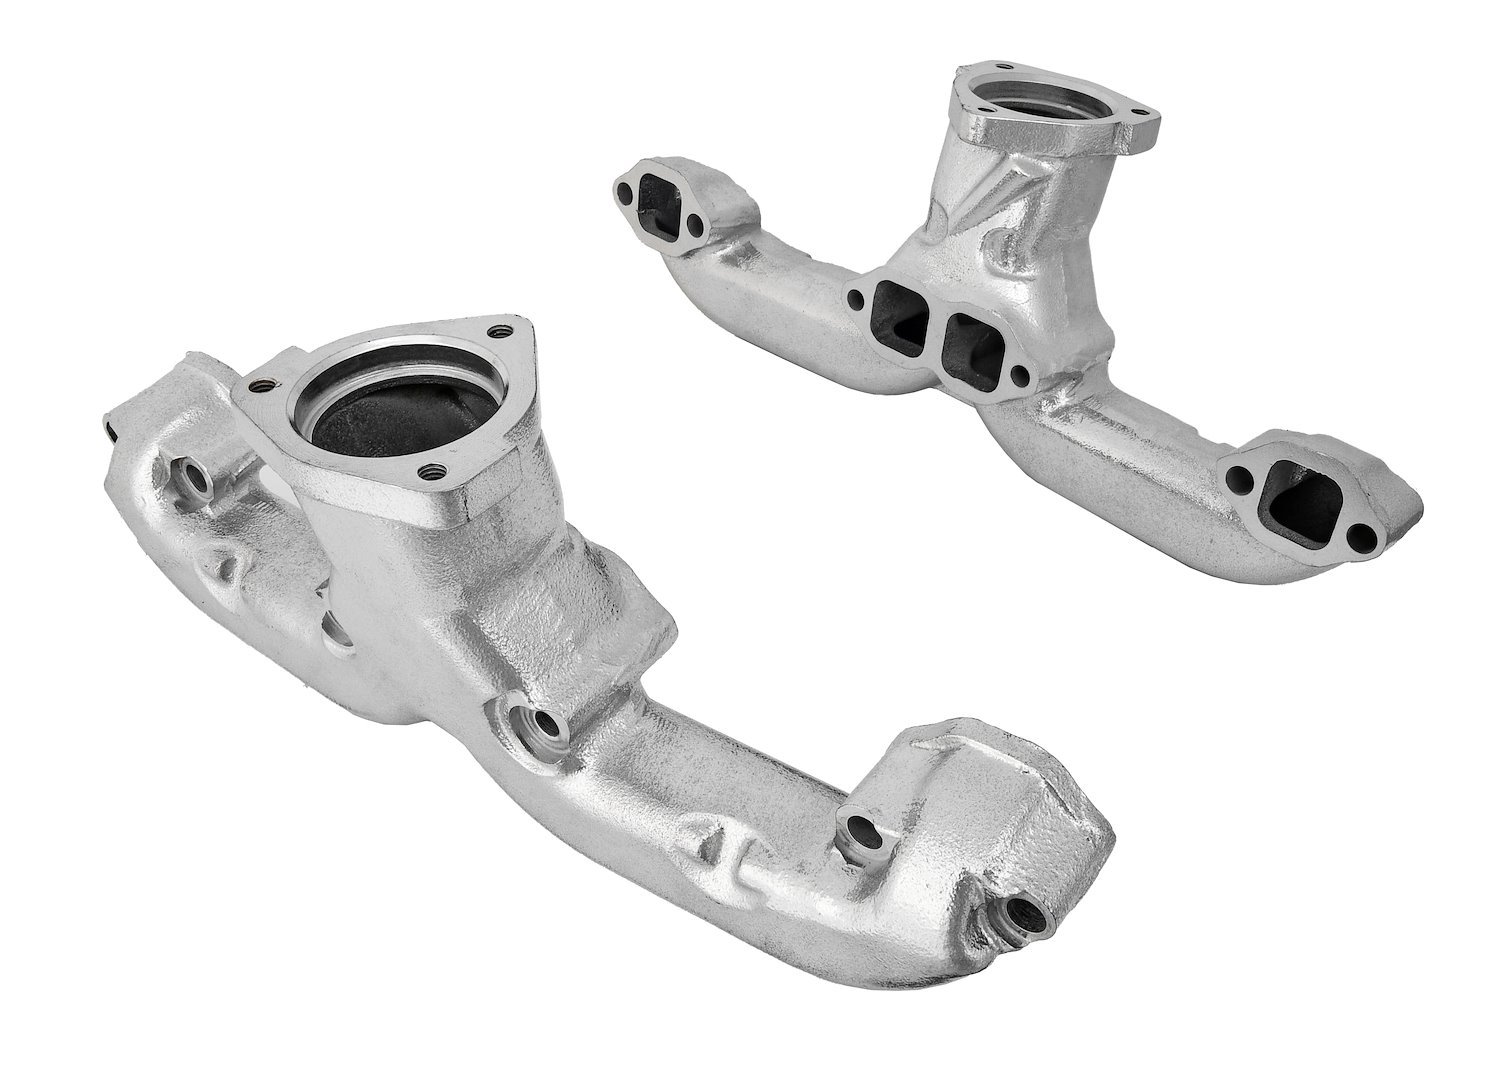 Silver Ceramic Coated Rams Horn Style Exhaust Manifolds Fits Most Round/Square Port Small Block Chevy Stock Cylinder Heads